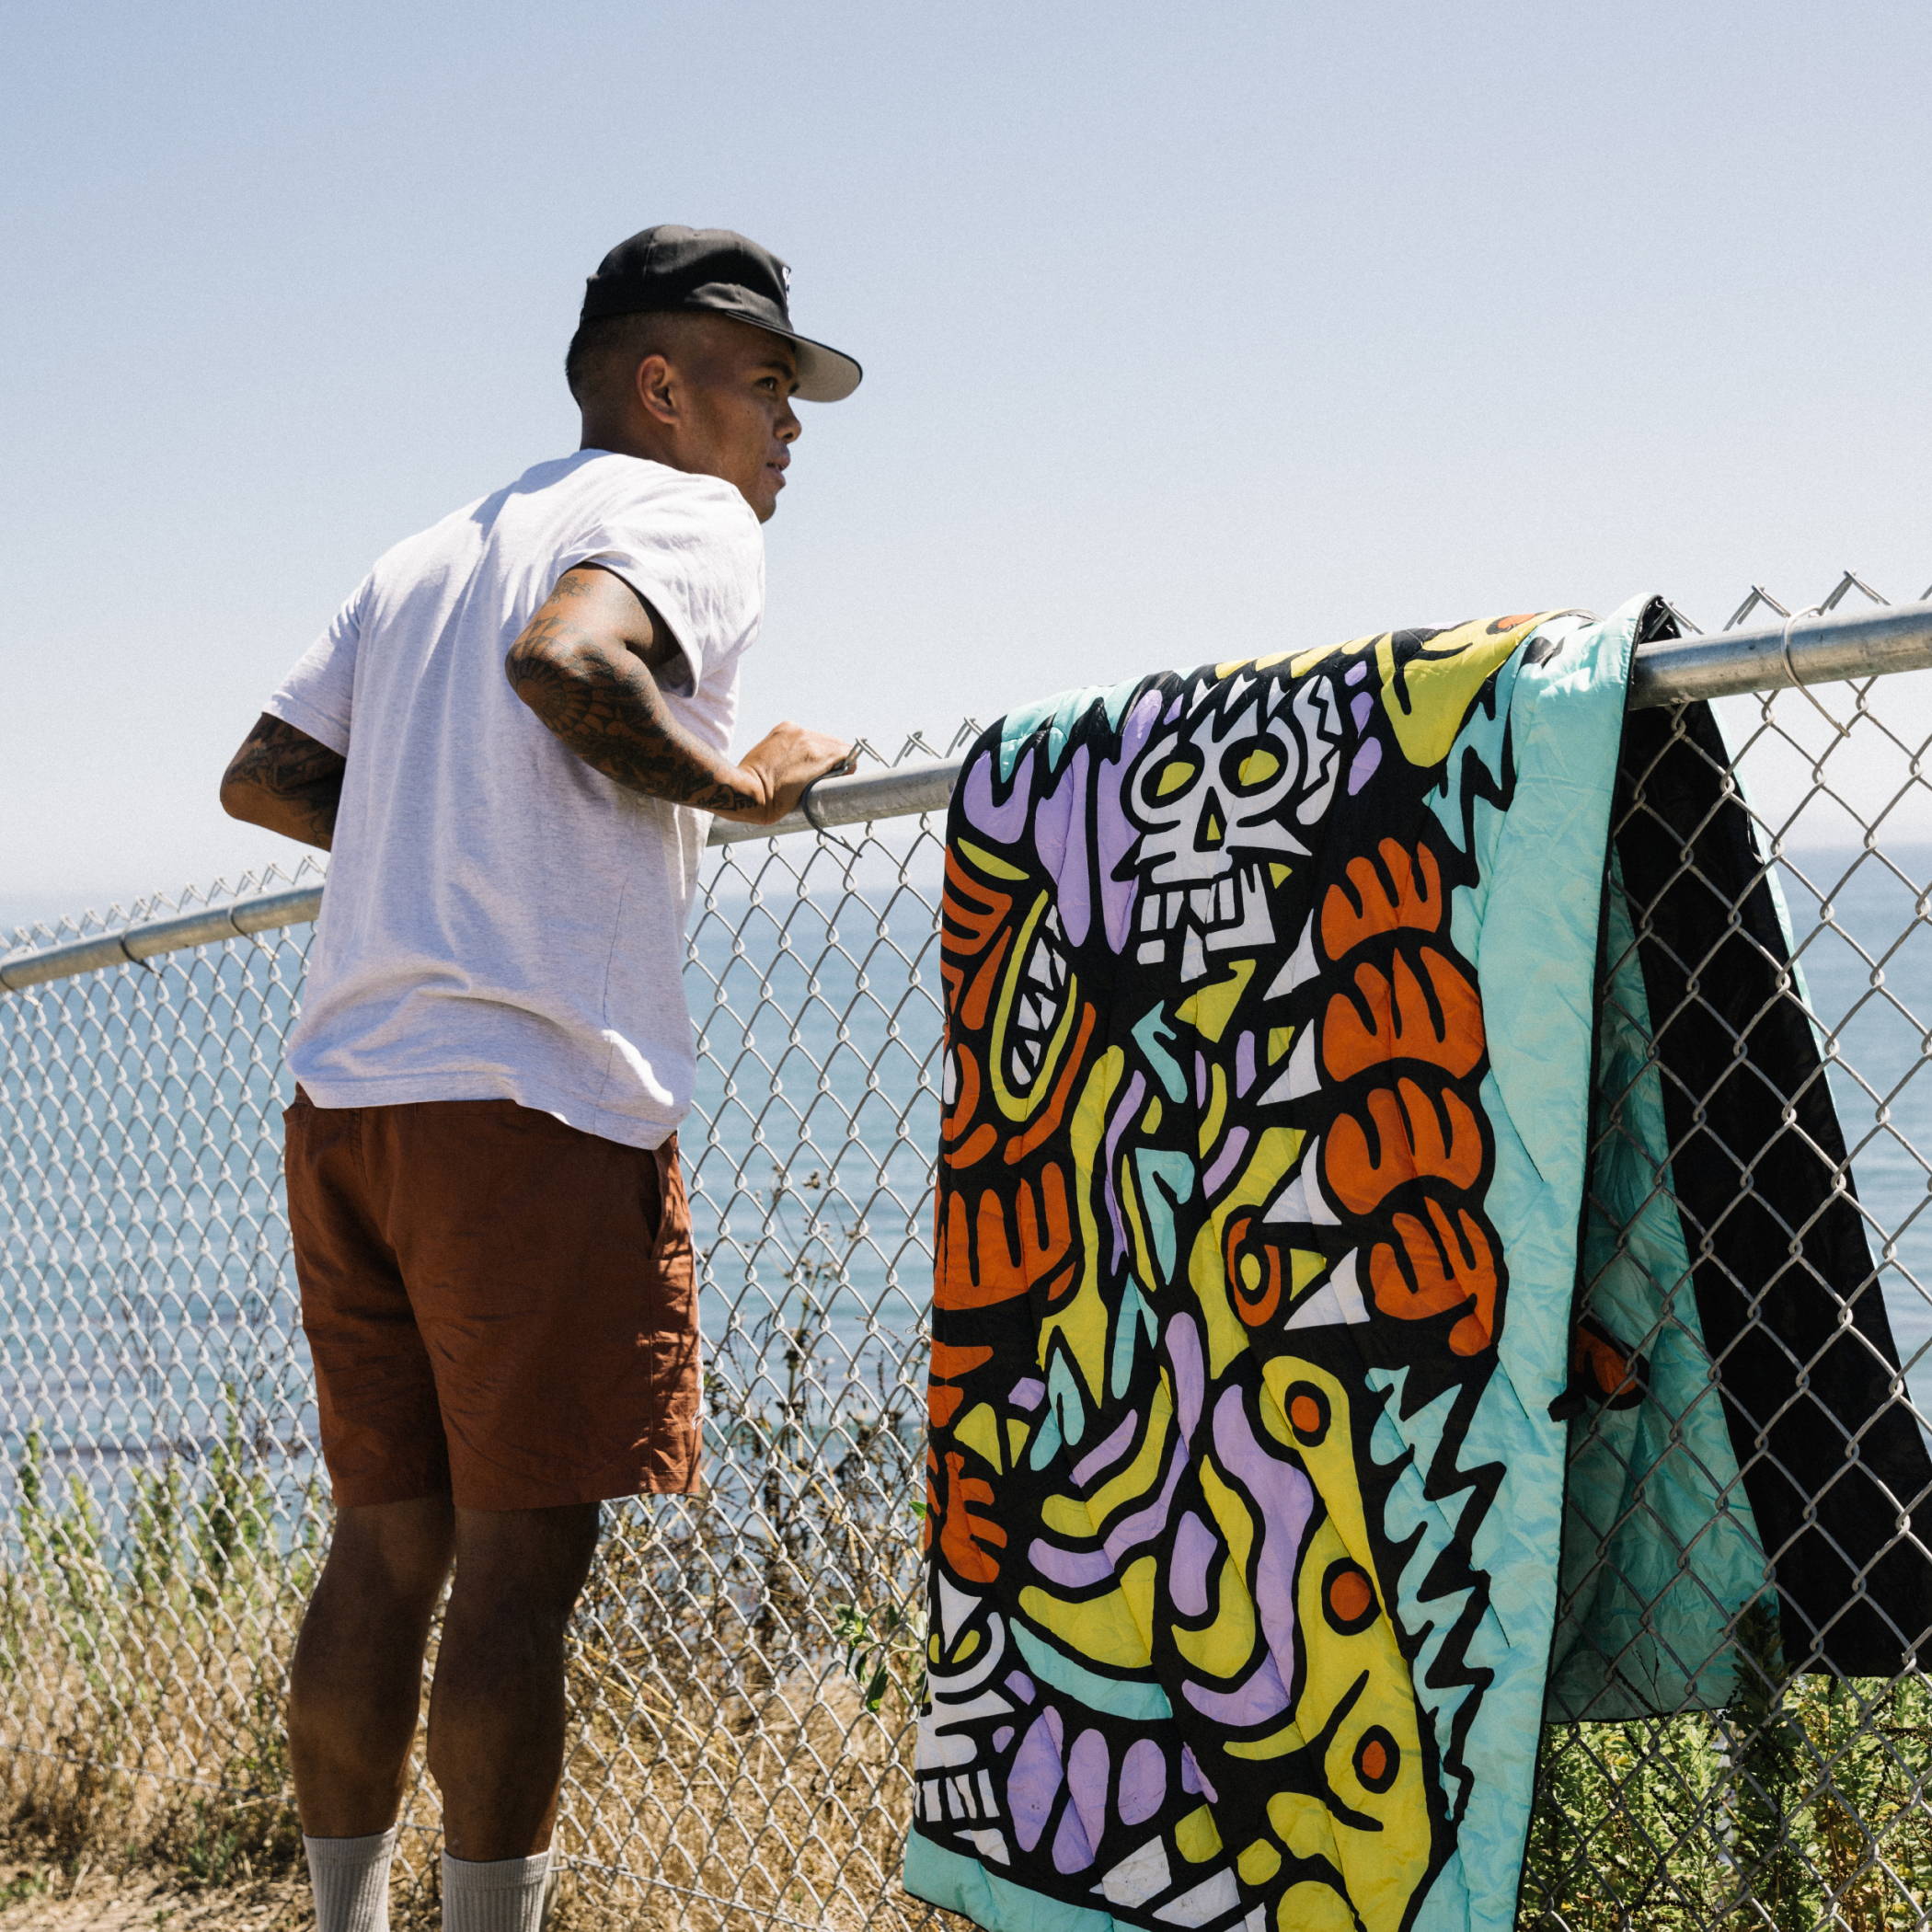 DJ Javier enjoys the ocean view, leaning over a wire fence with the limited edition In the Balance Original Puffy Blanketb draping over it.